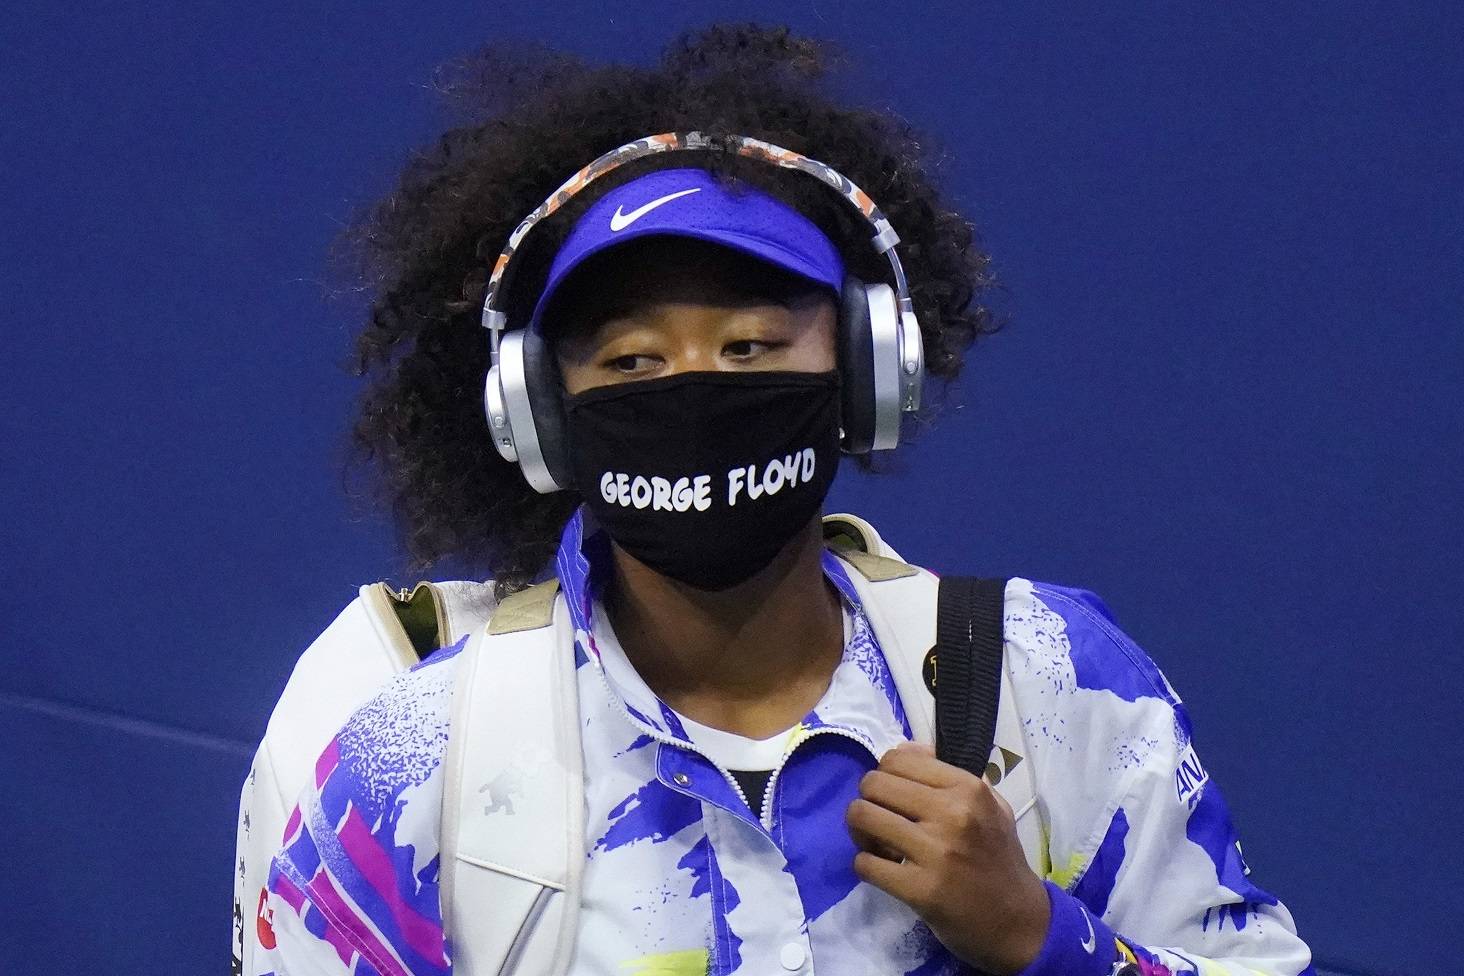 Naomi Osaka of Japan wears a protective mask featuring the name “George Floyd” while arriving on court to face Shelby Rogers of the United States during the quarterfinal round of the US Open tennis championships in New York on Tuesday, Sept. 8, 2020. (Frank Franklin II/Associated Press file)